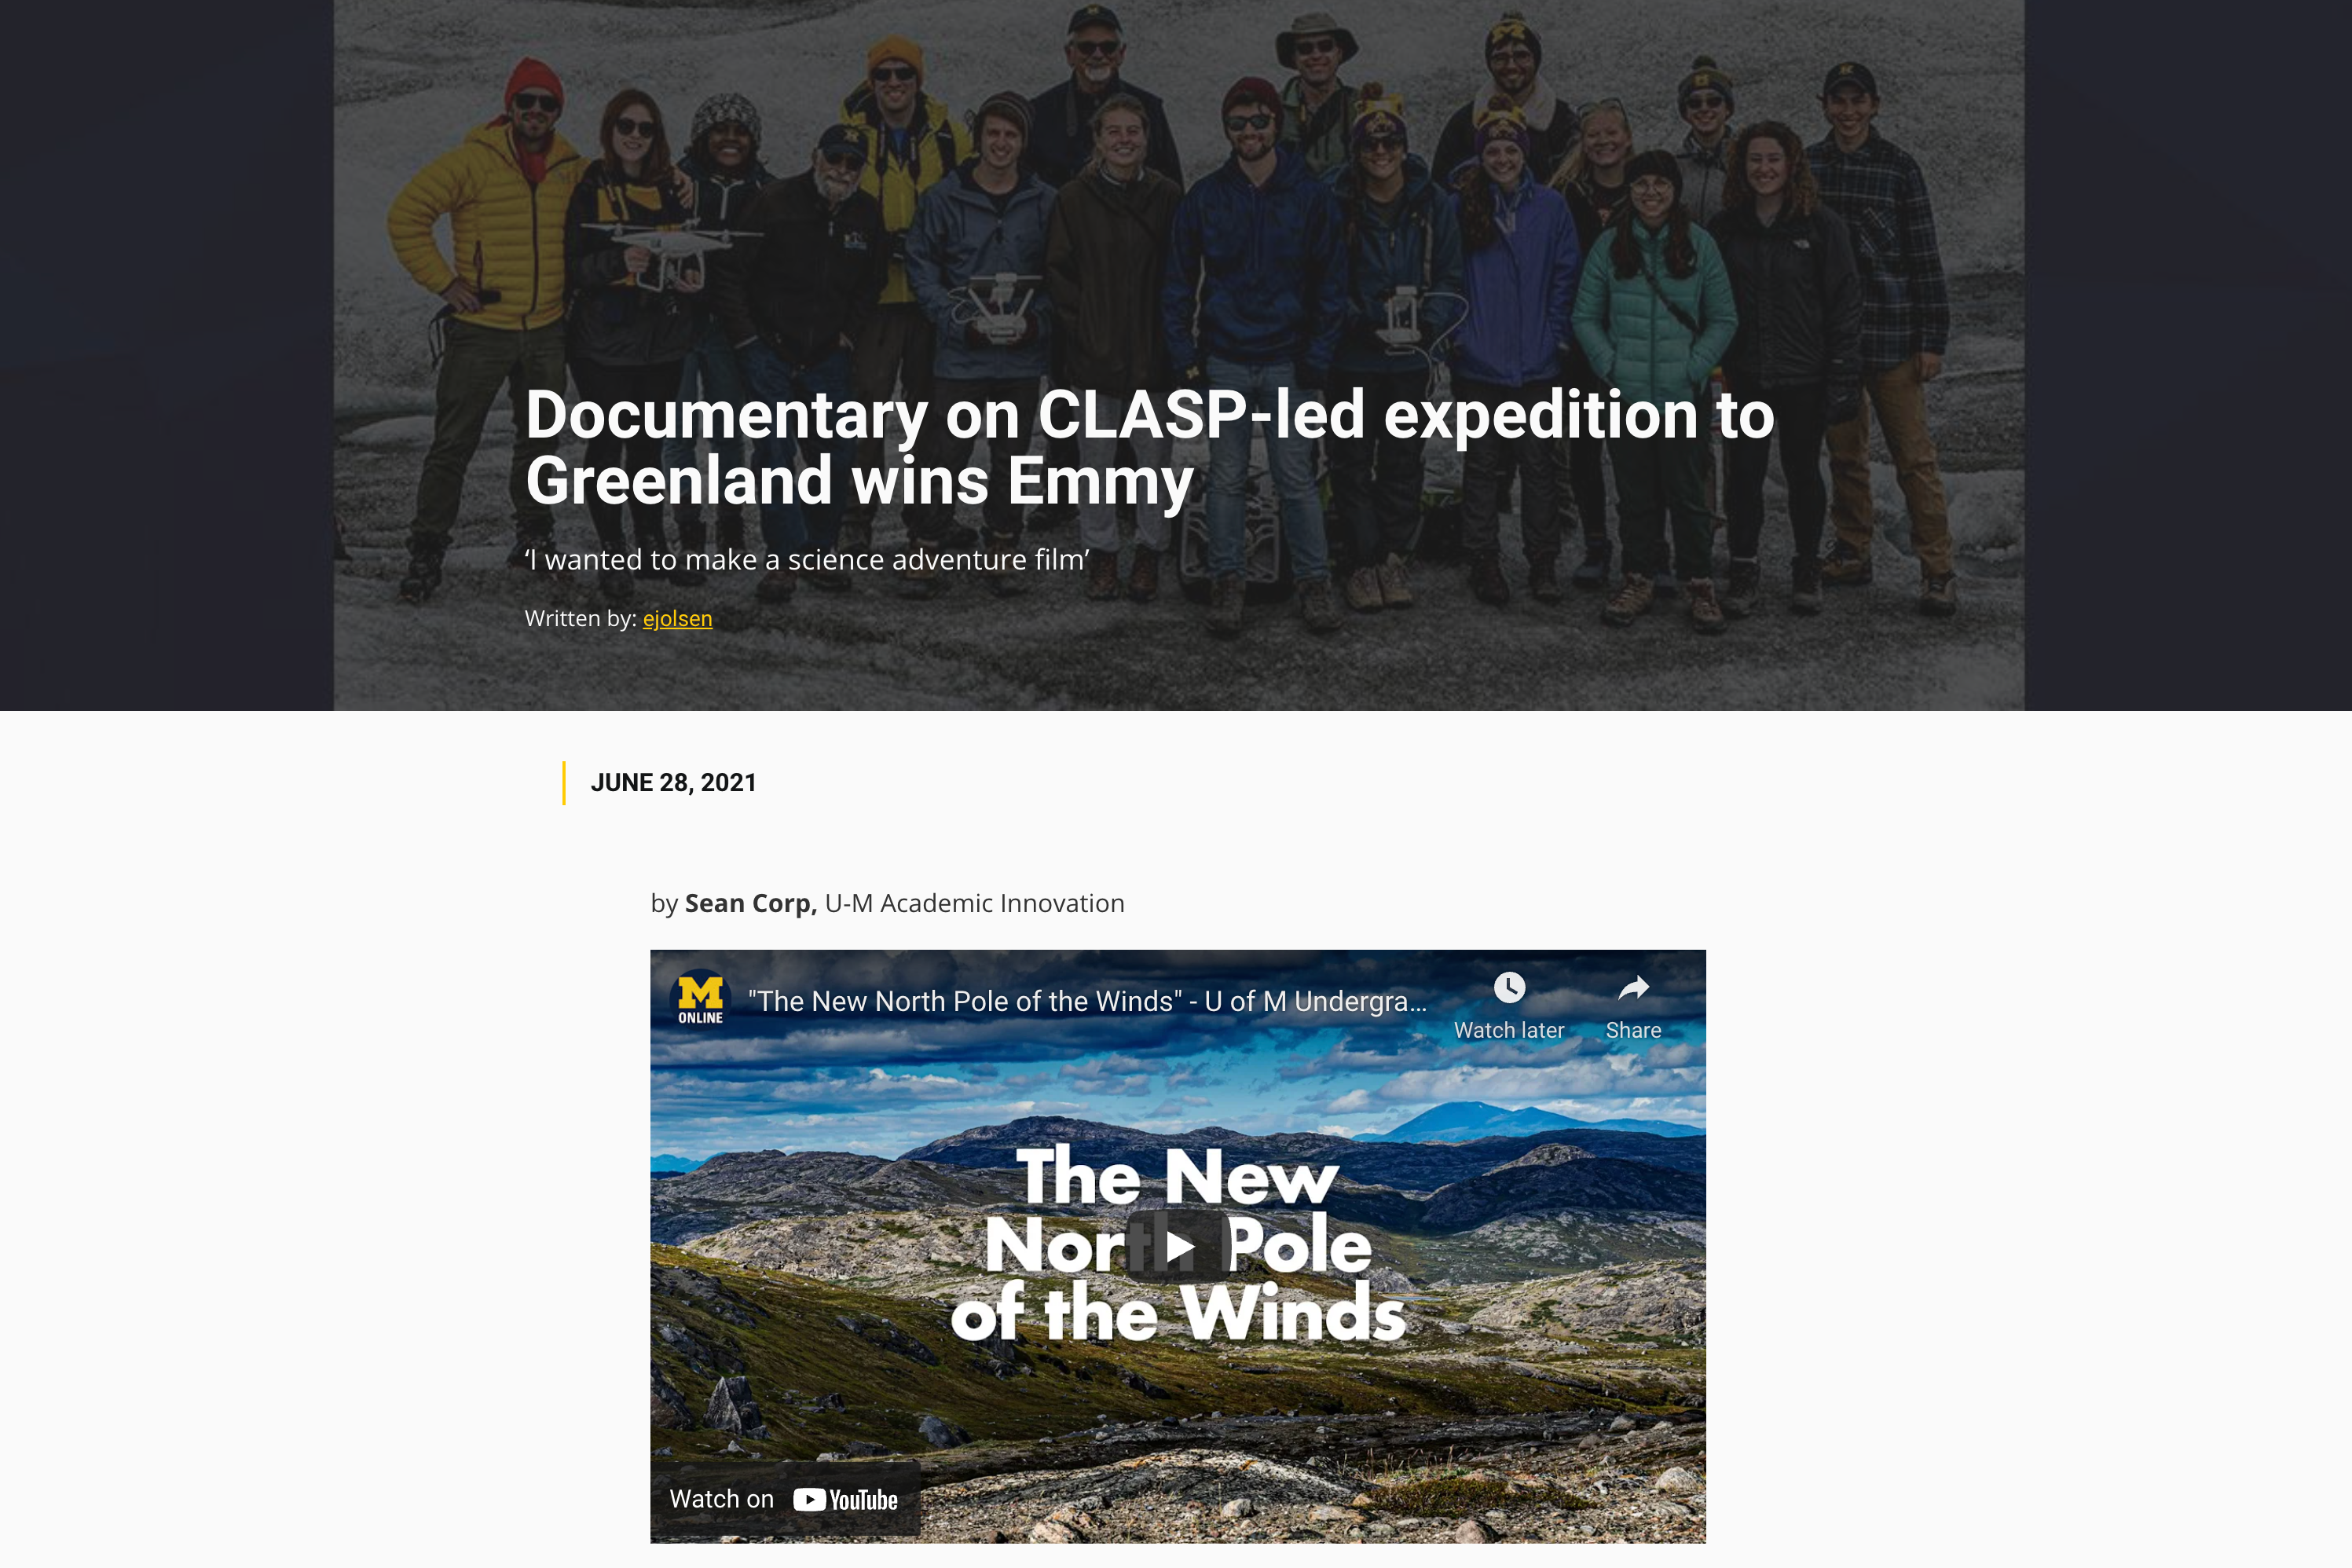 Documentary on CLASP-led expedition to Greenland wins Emmy